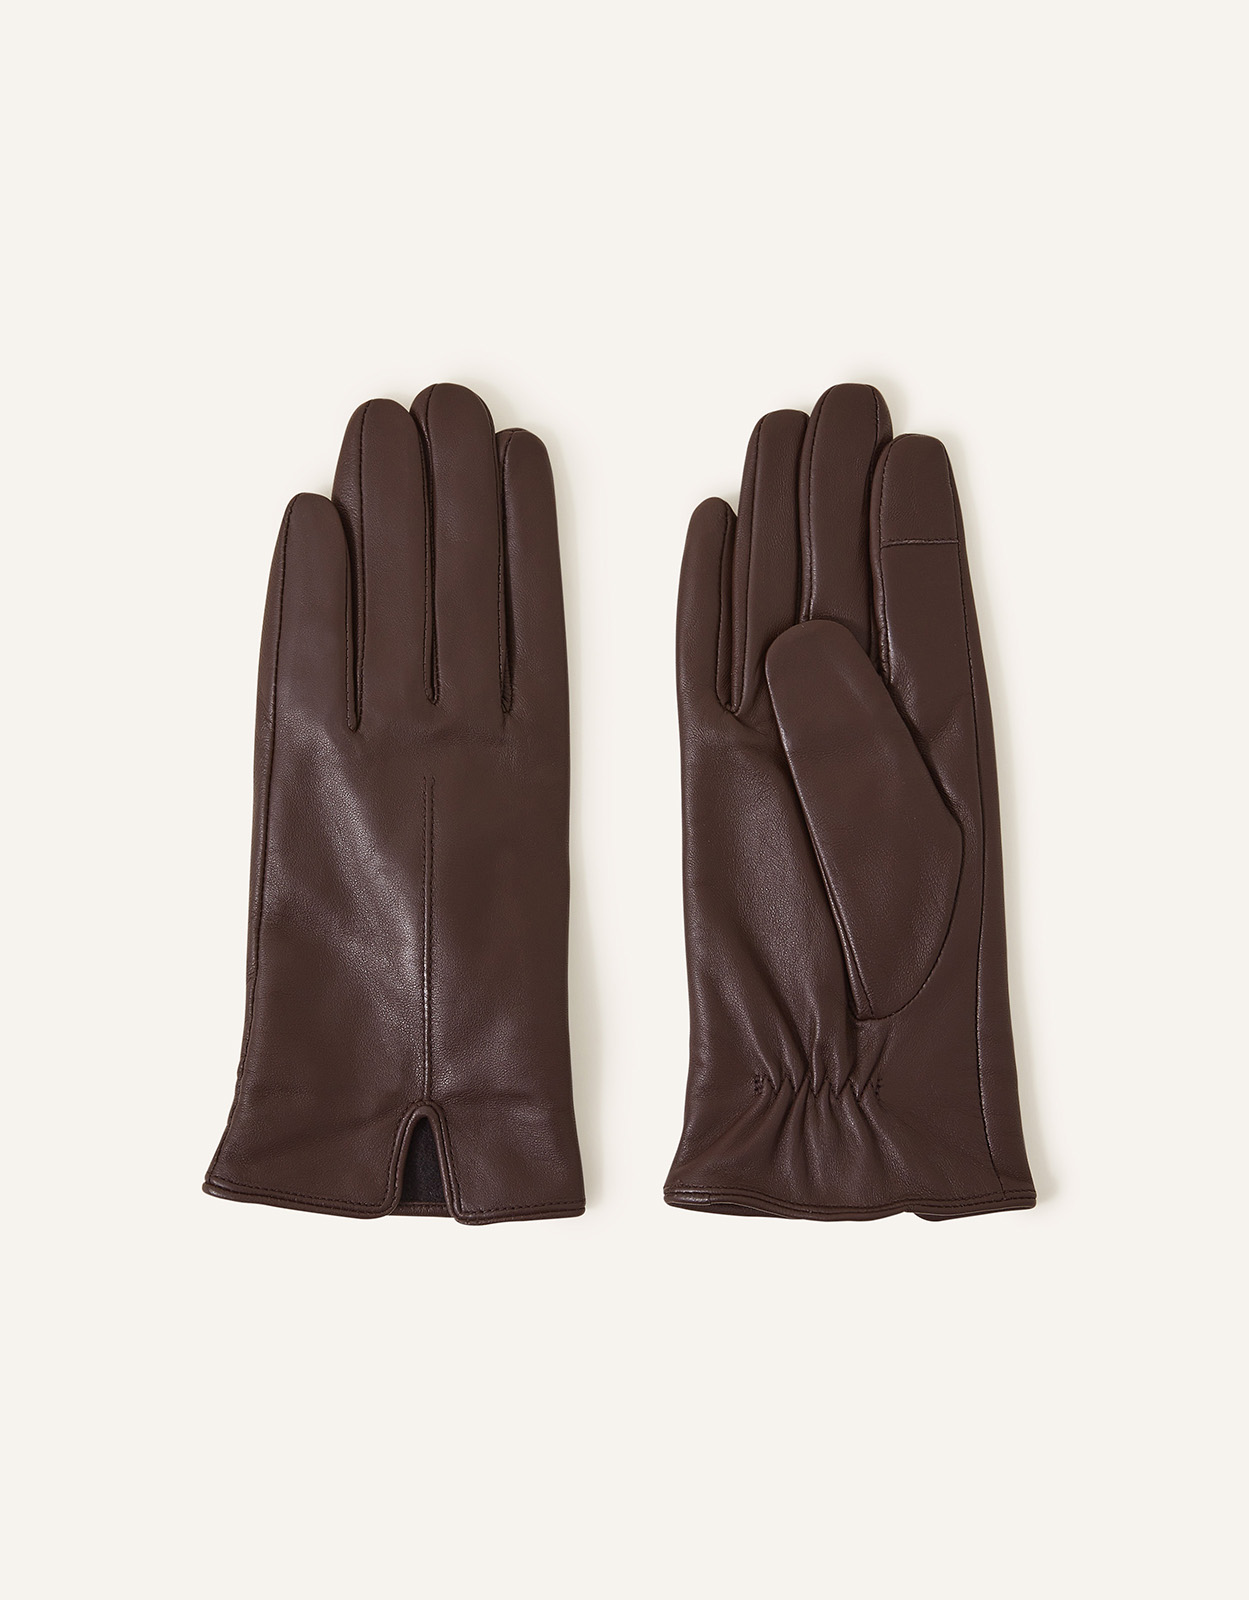 Accessorize Touchscreen Leather Gloves Brown, Size: One Size